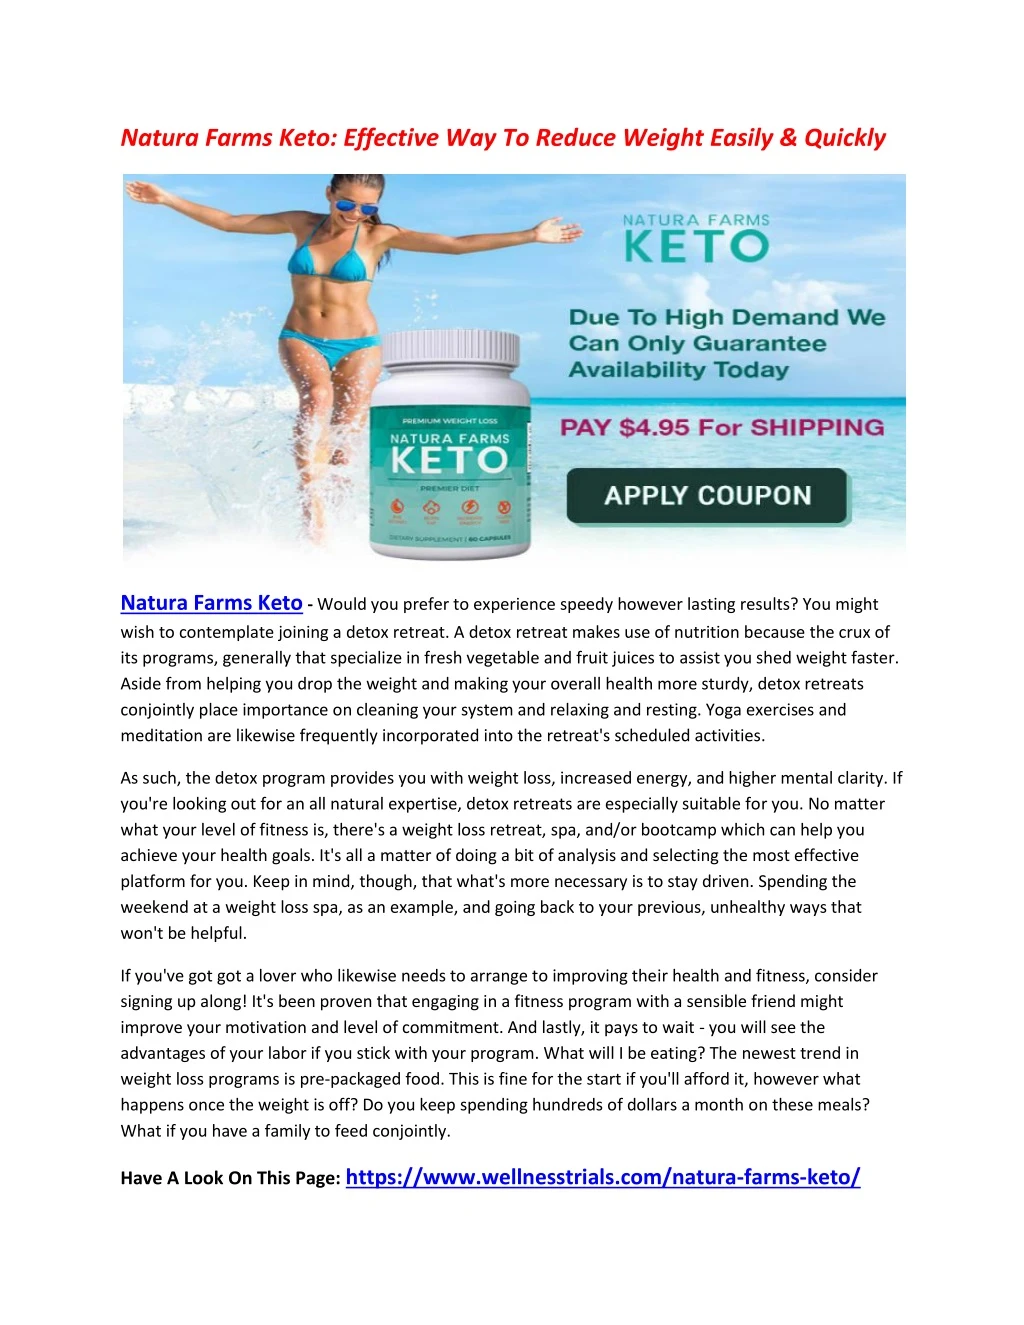 natura farms keto effective way to reduce weight